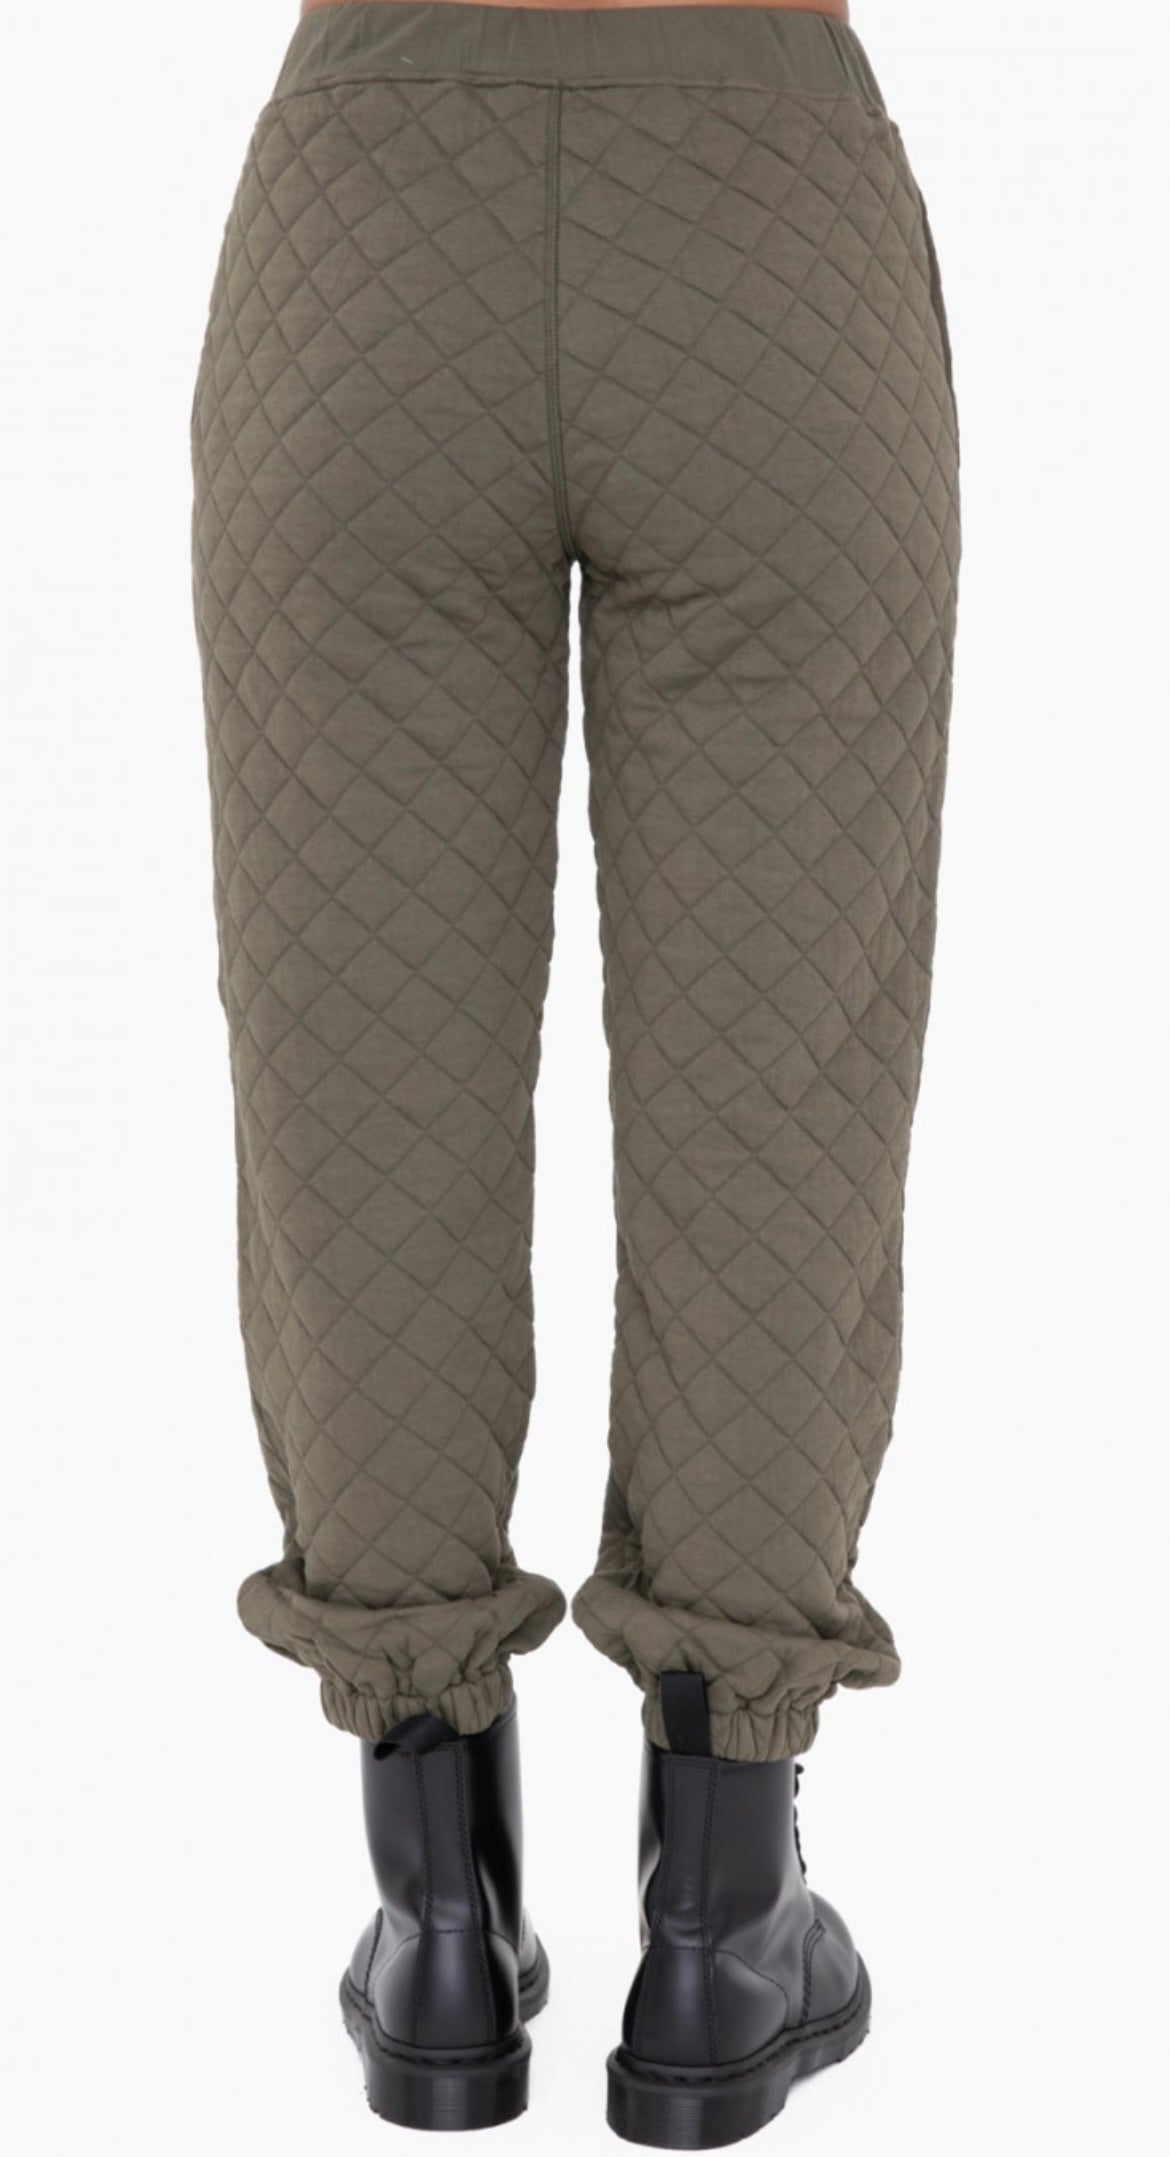 Quilted Luxury Sweatsuit Bottom